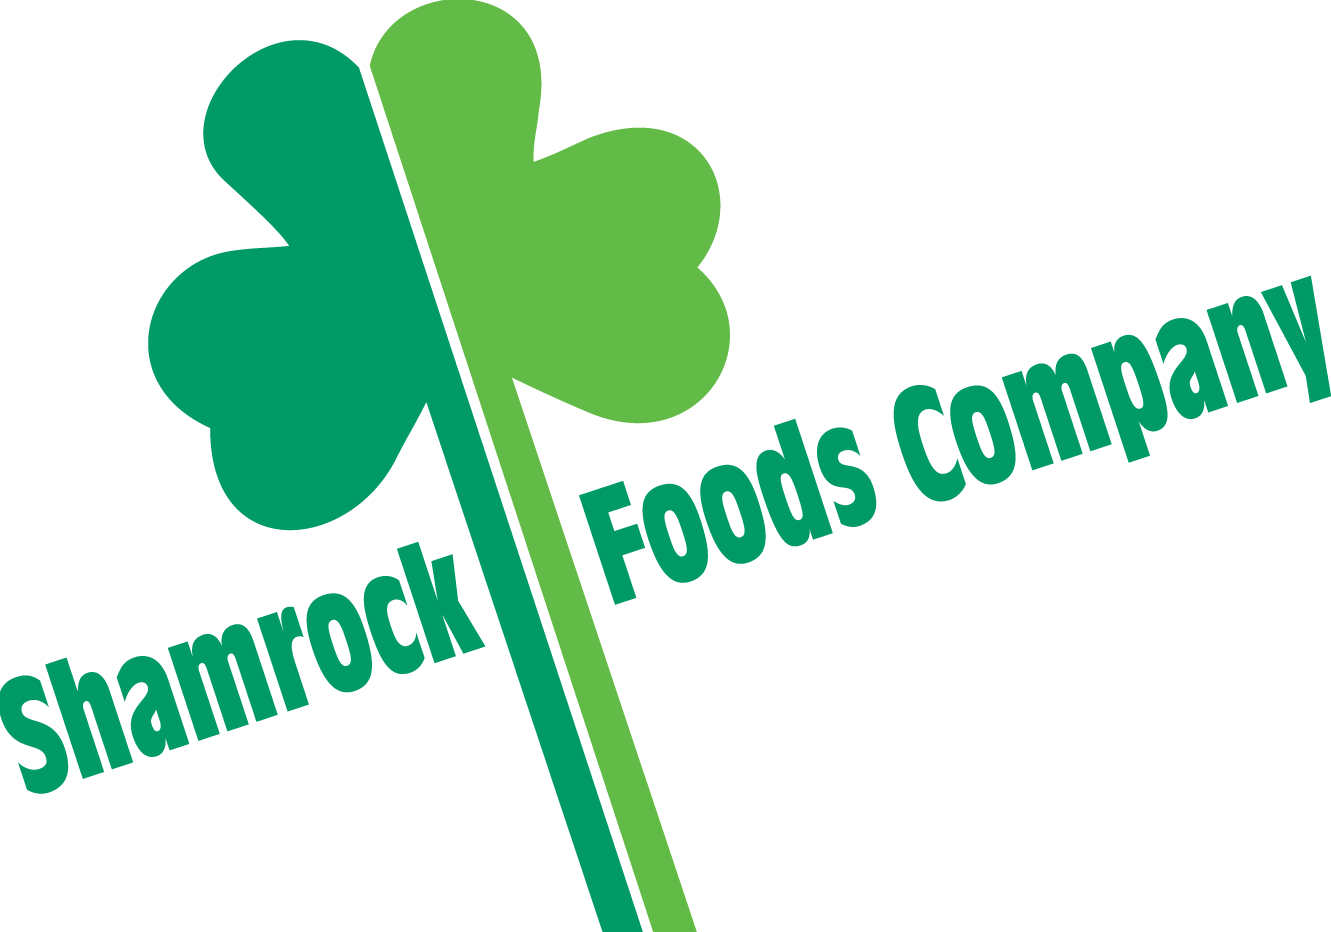 Download Get An Alert When New Jobs Are Posted Shamrock Foods Company Logo Png Image With No Background Pngkey Com